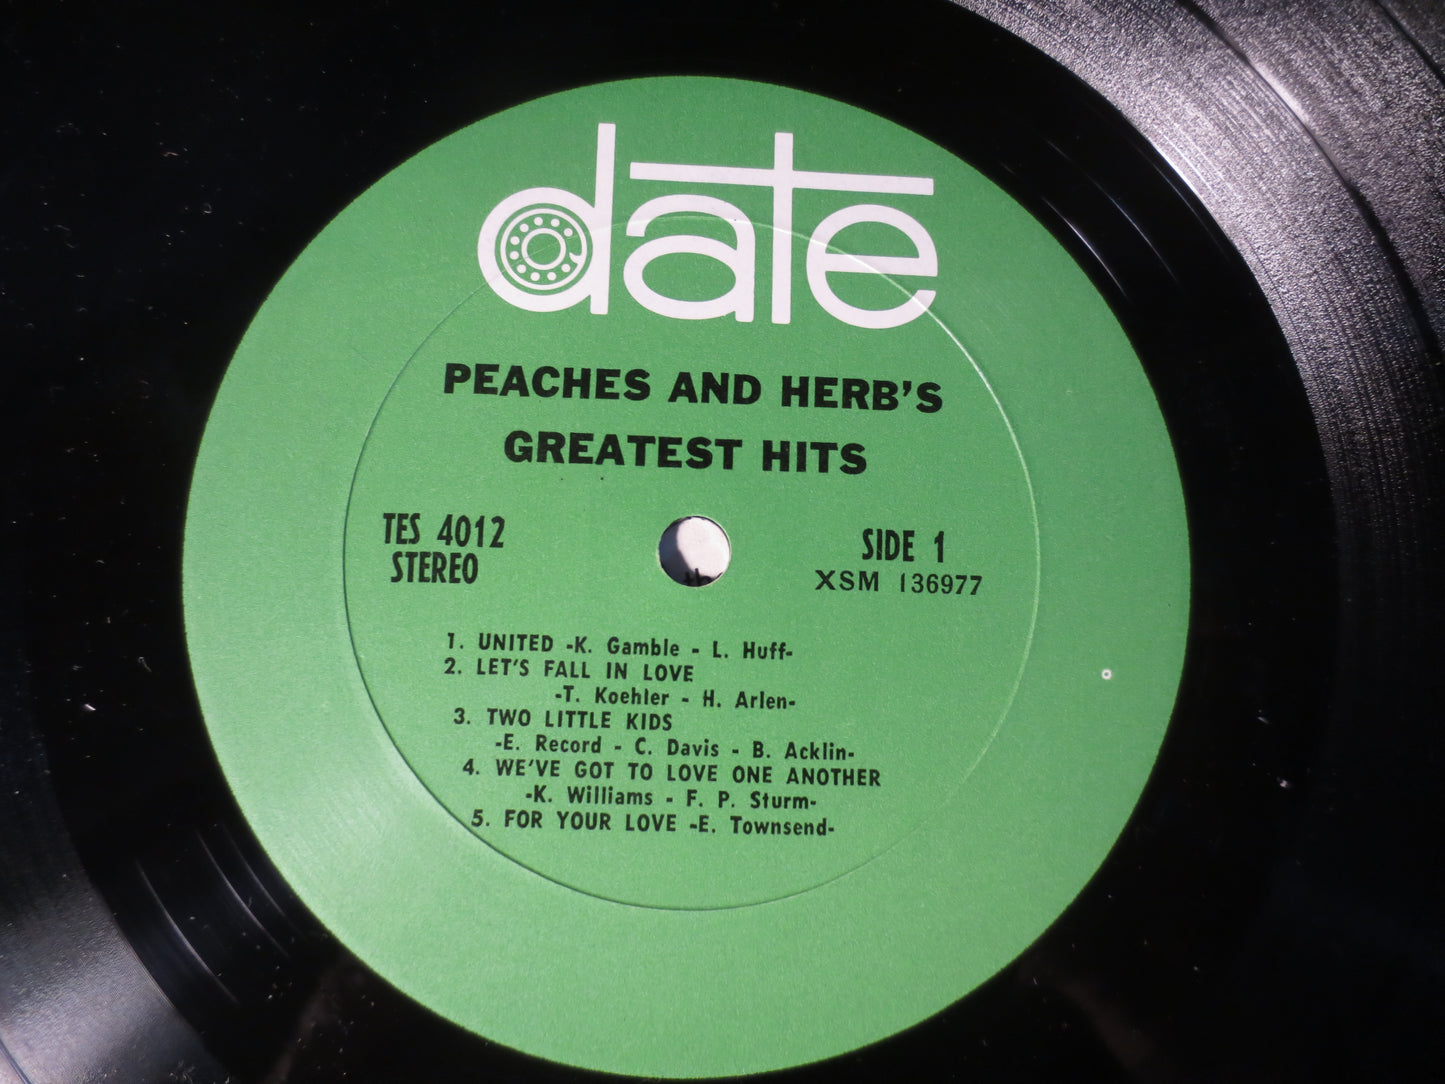 PEACHES and HERB'S, GREATEST Hits, Pop Record, Vintage Vinyl, Record Vinyl, Record, Vinyl Record, Vinyl Lp, 1968 Records